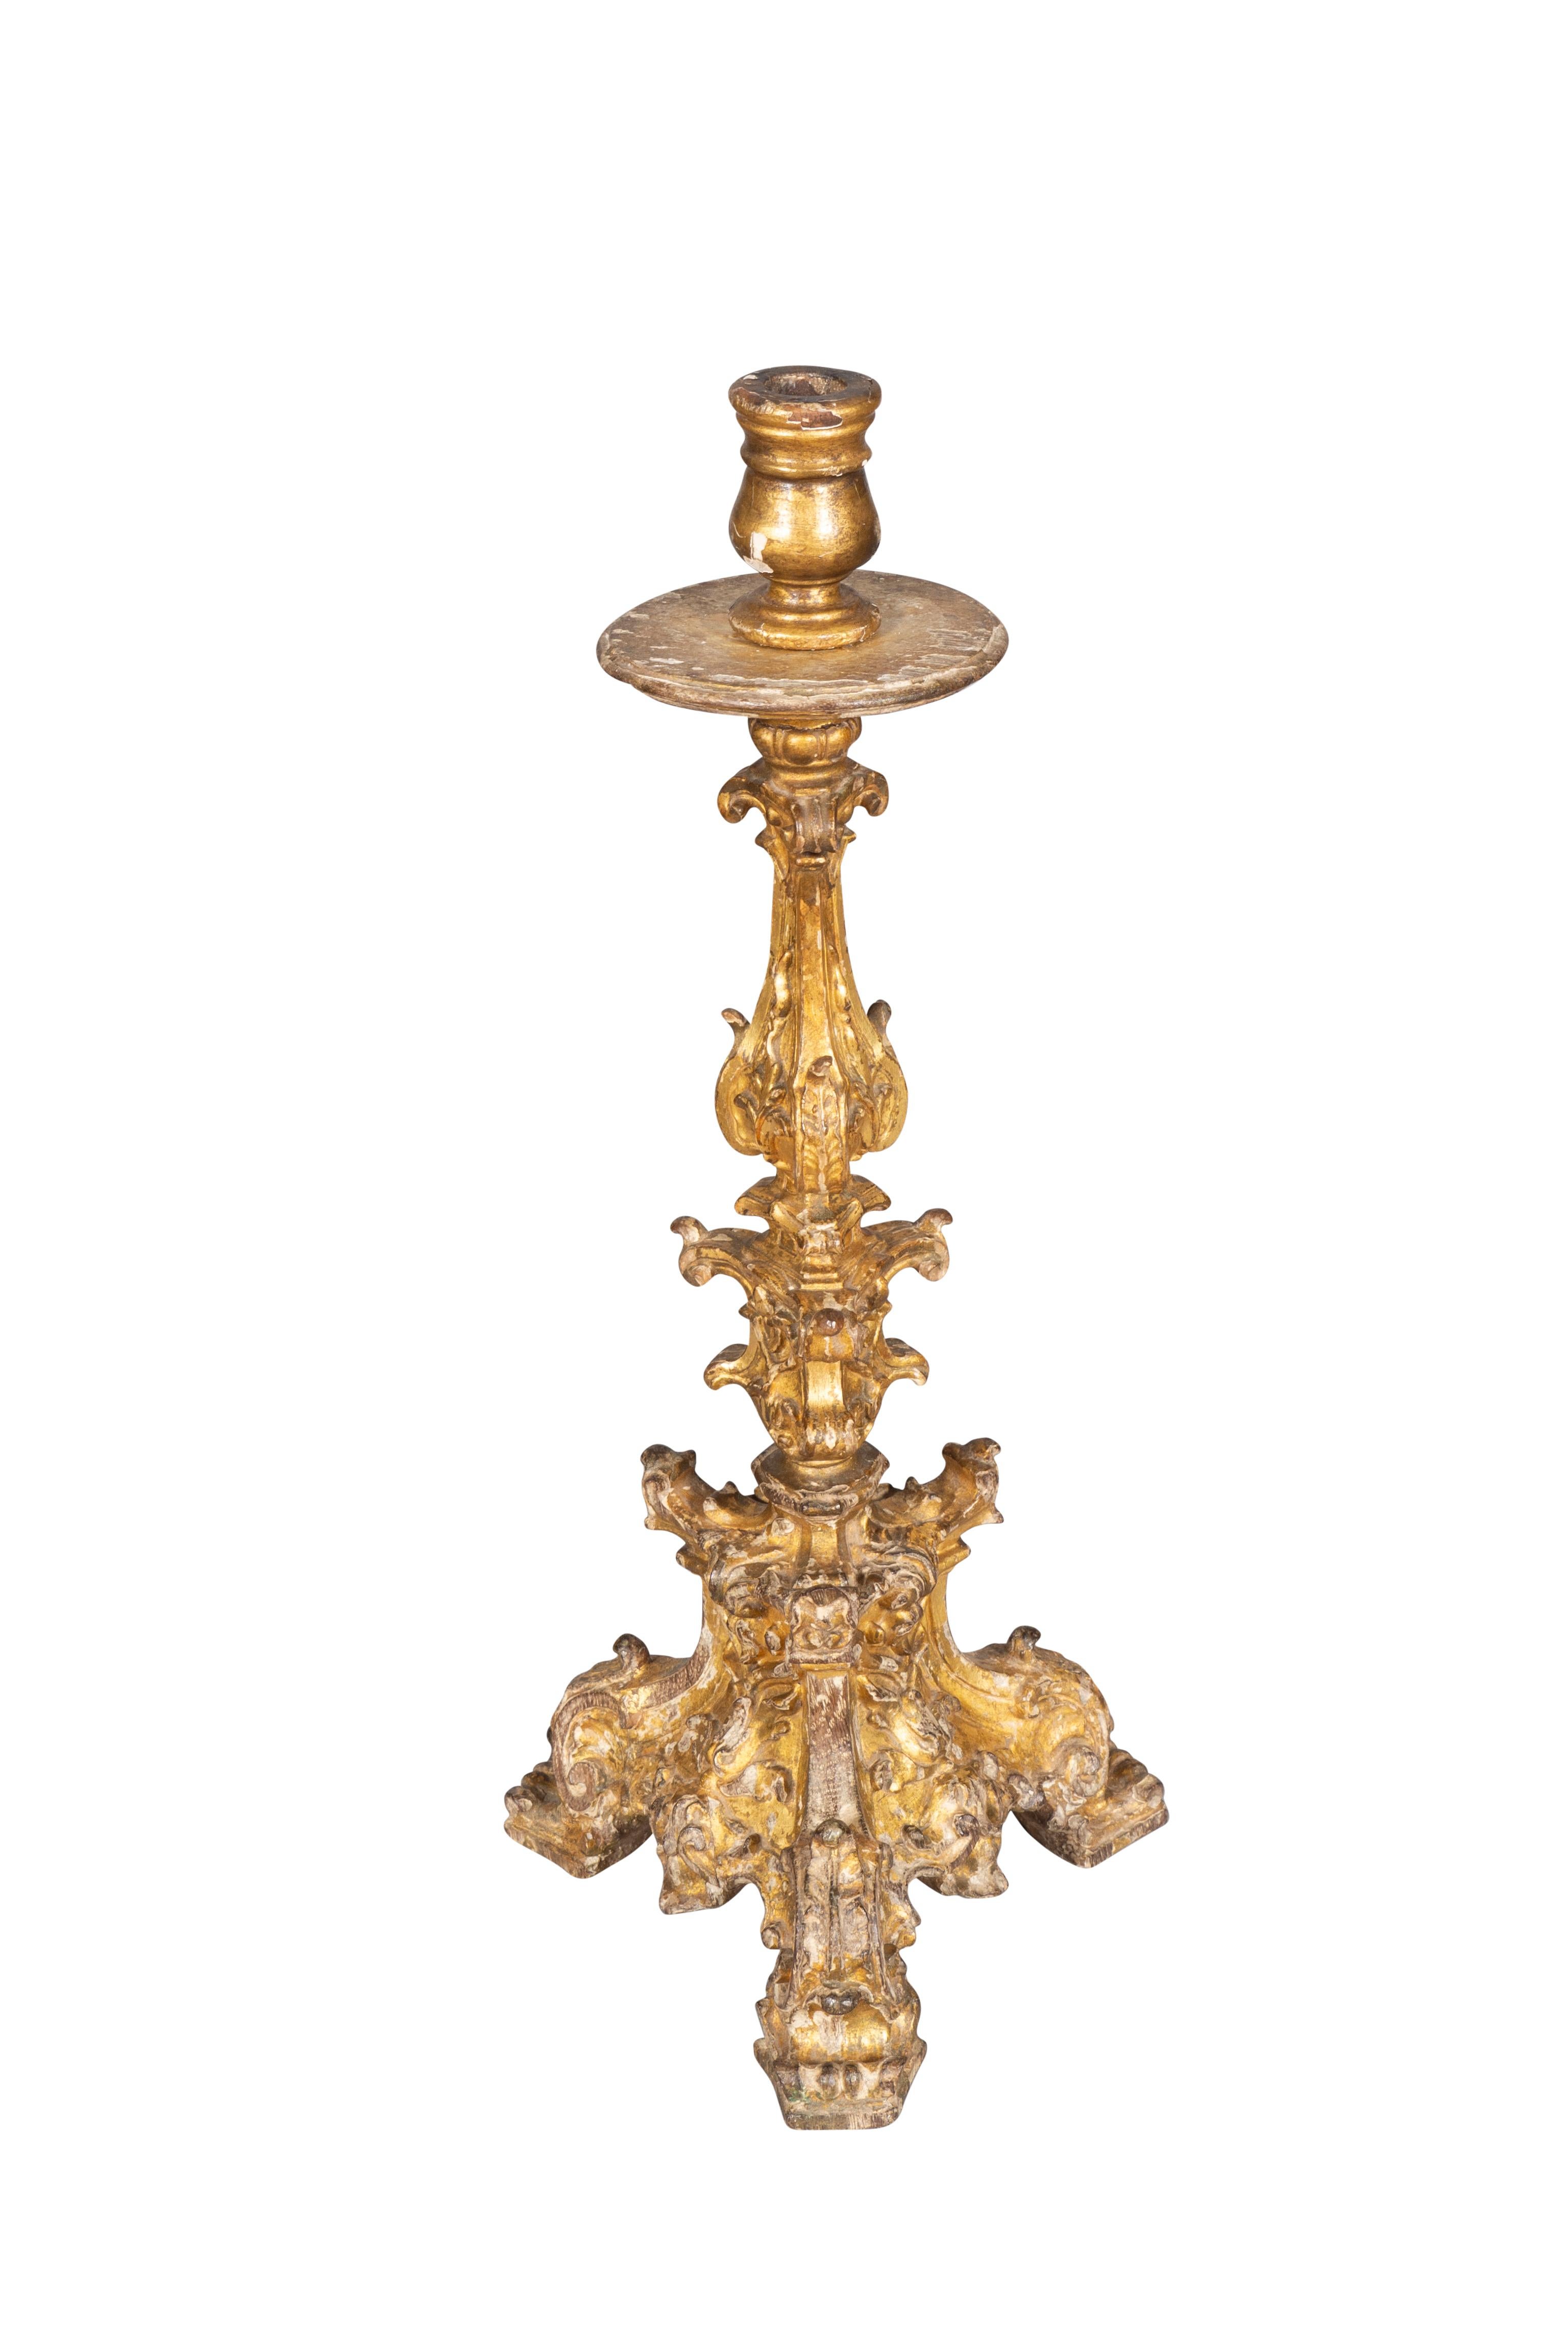 Well carved with baroque scrolls ,triangular base. 